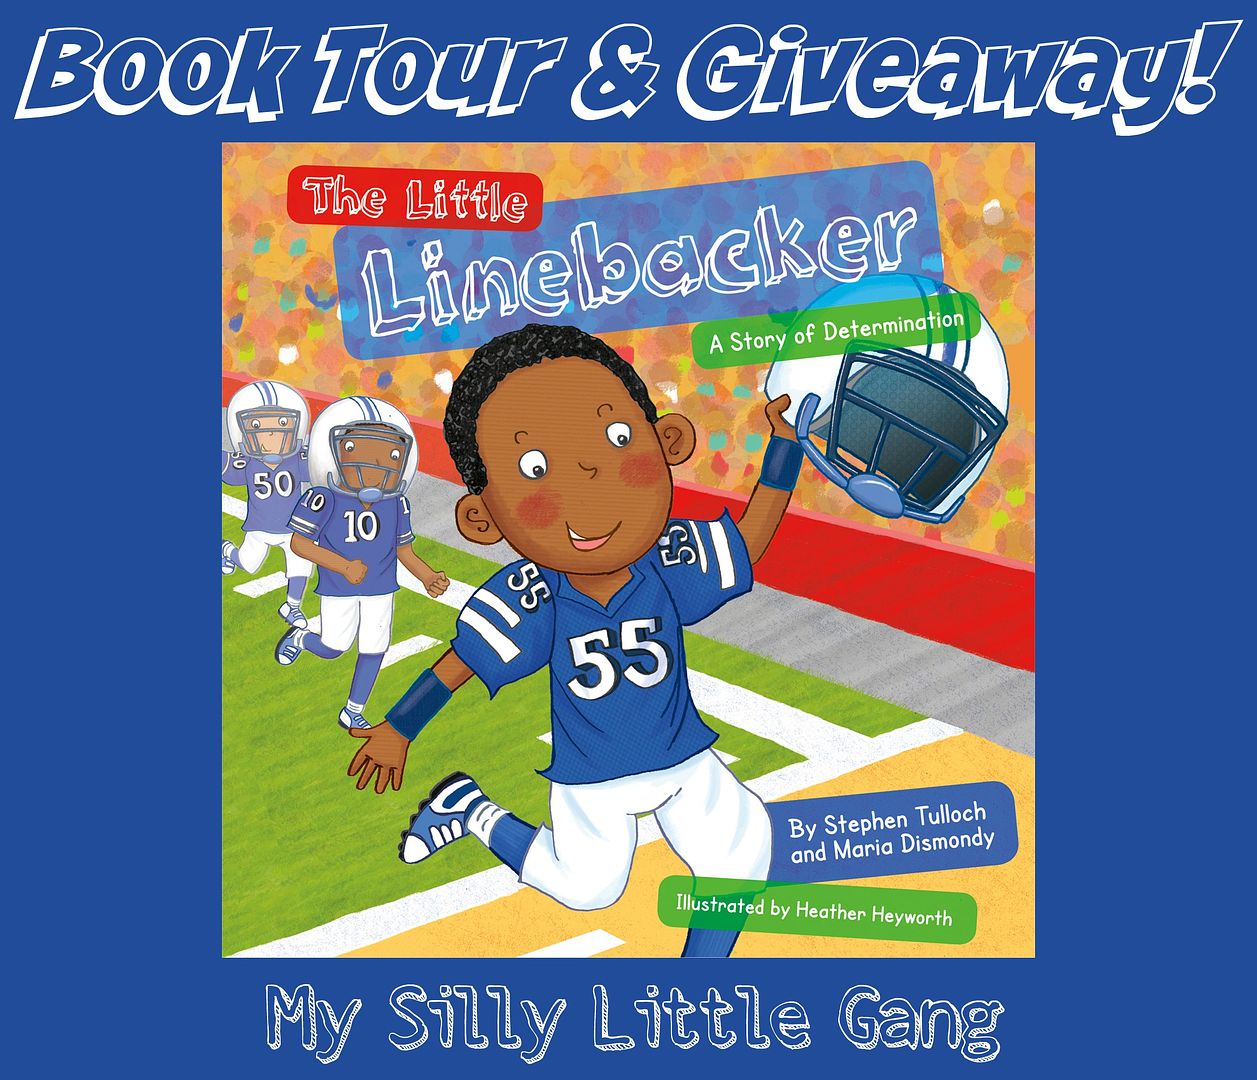 The Little Linebacker Book Giveaway